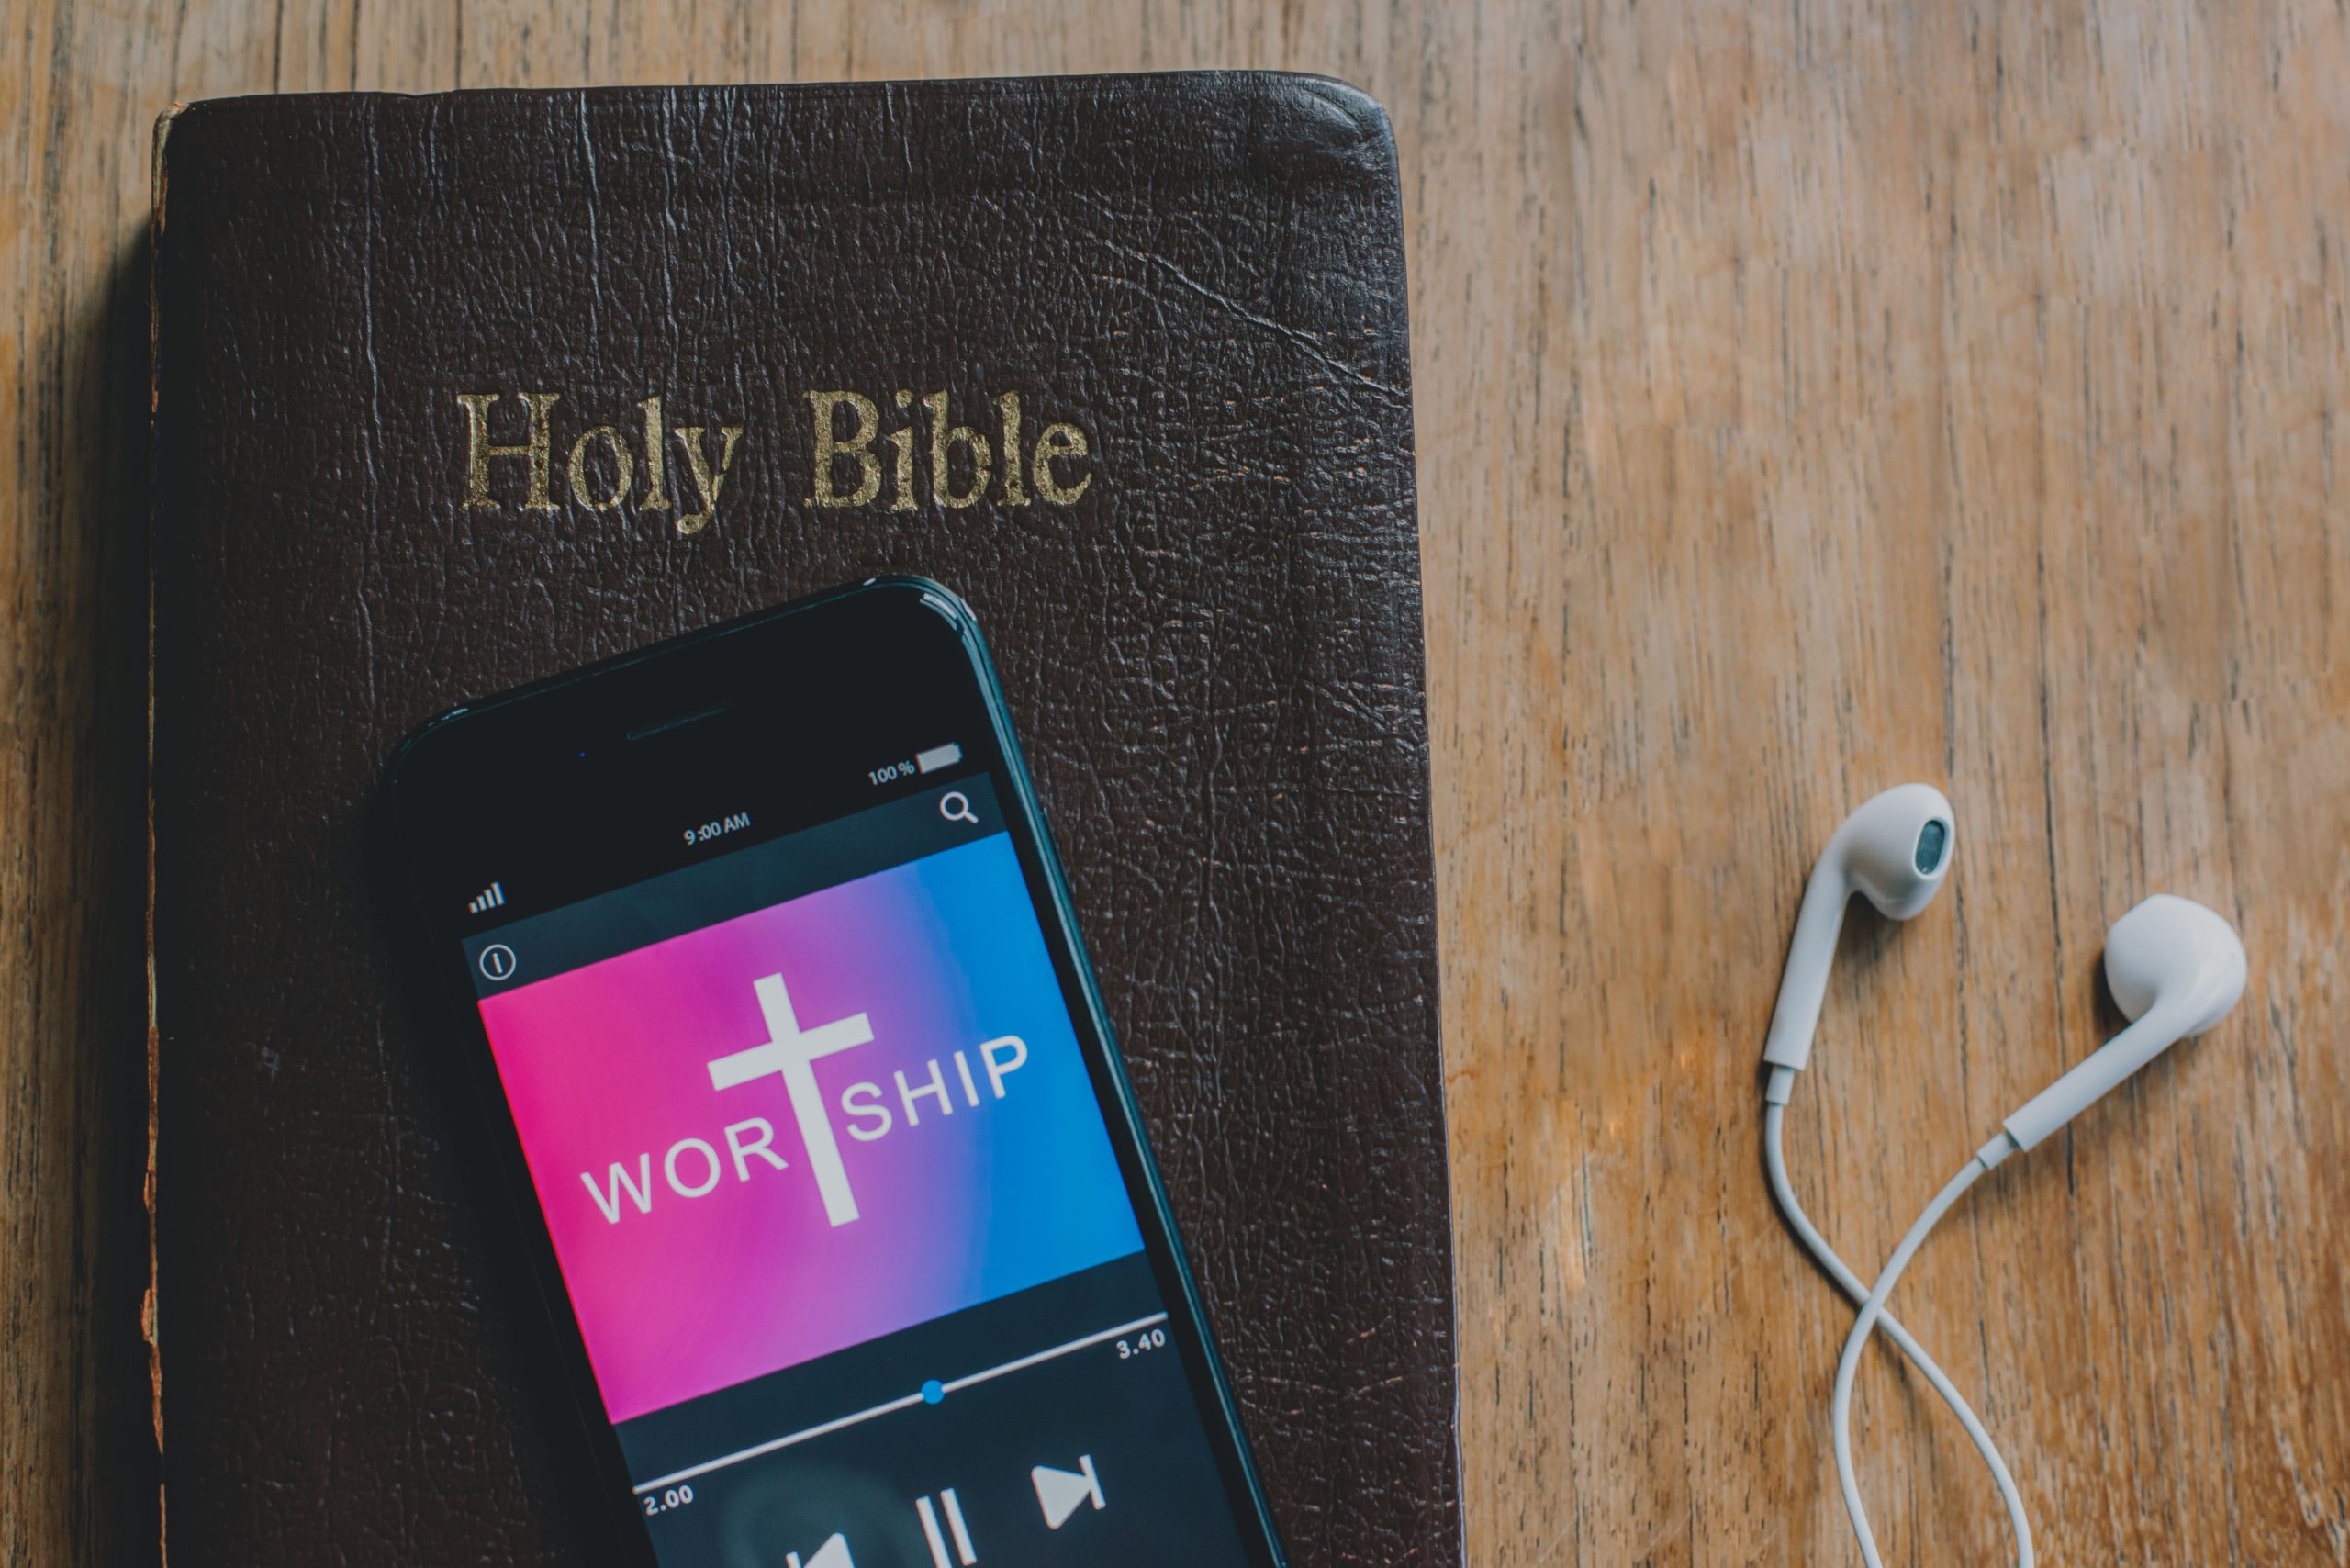 A photo of a phone playing worship music atop of the Bible. There are earbuds on the right side of the photo.